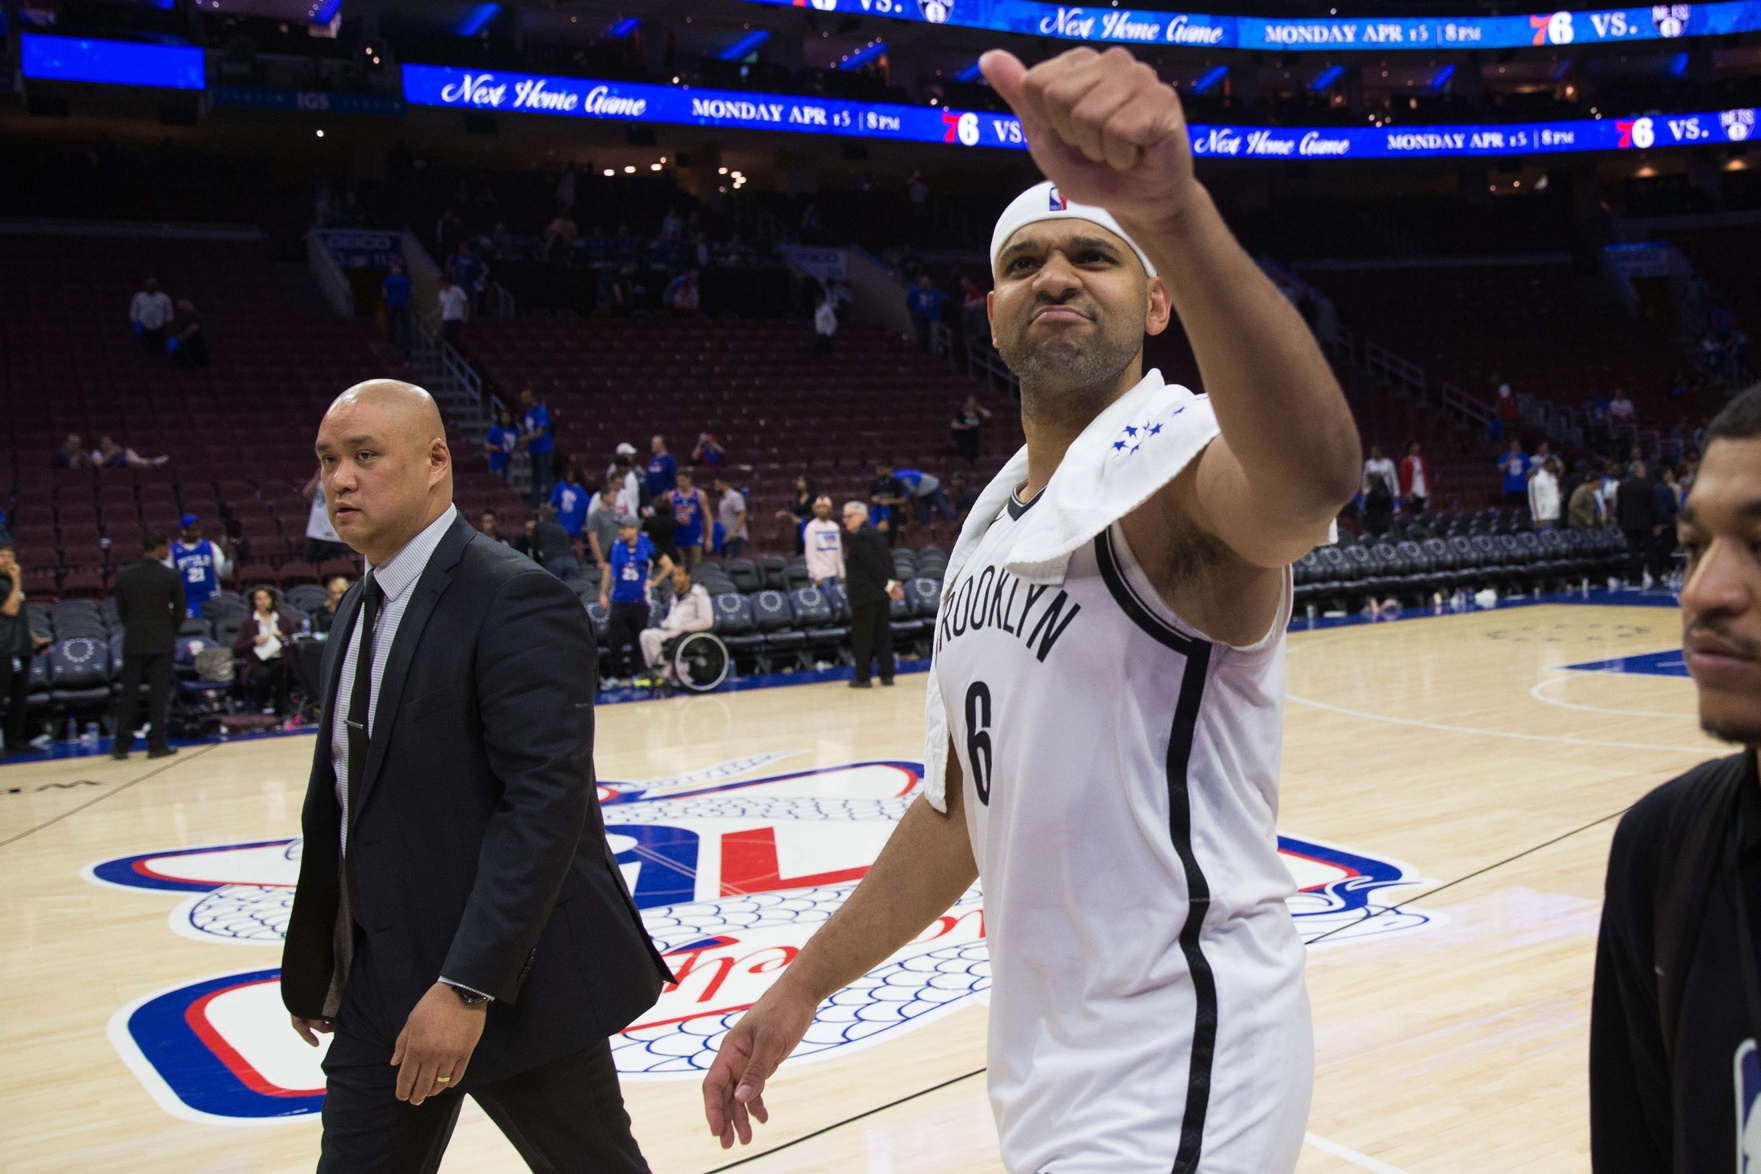 Jared Dudley needs to relish this moment against the 76ers